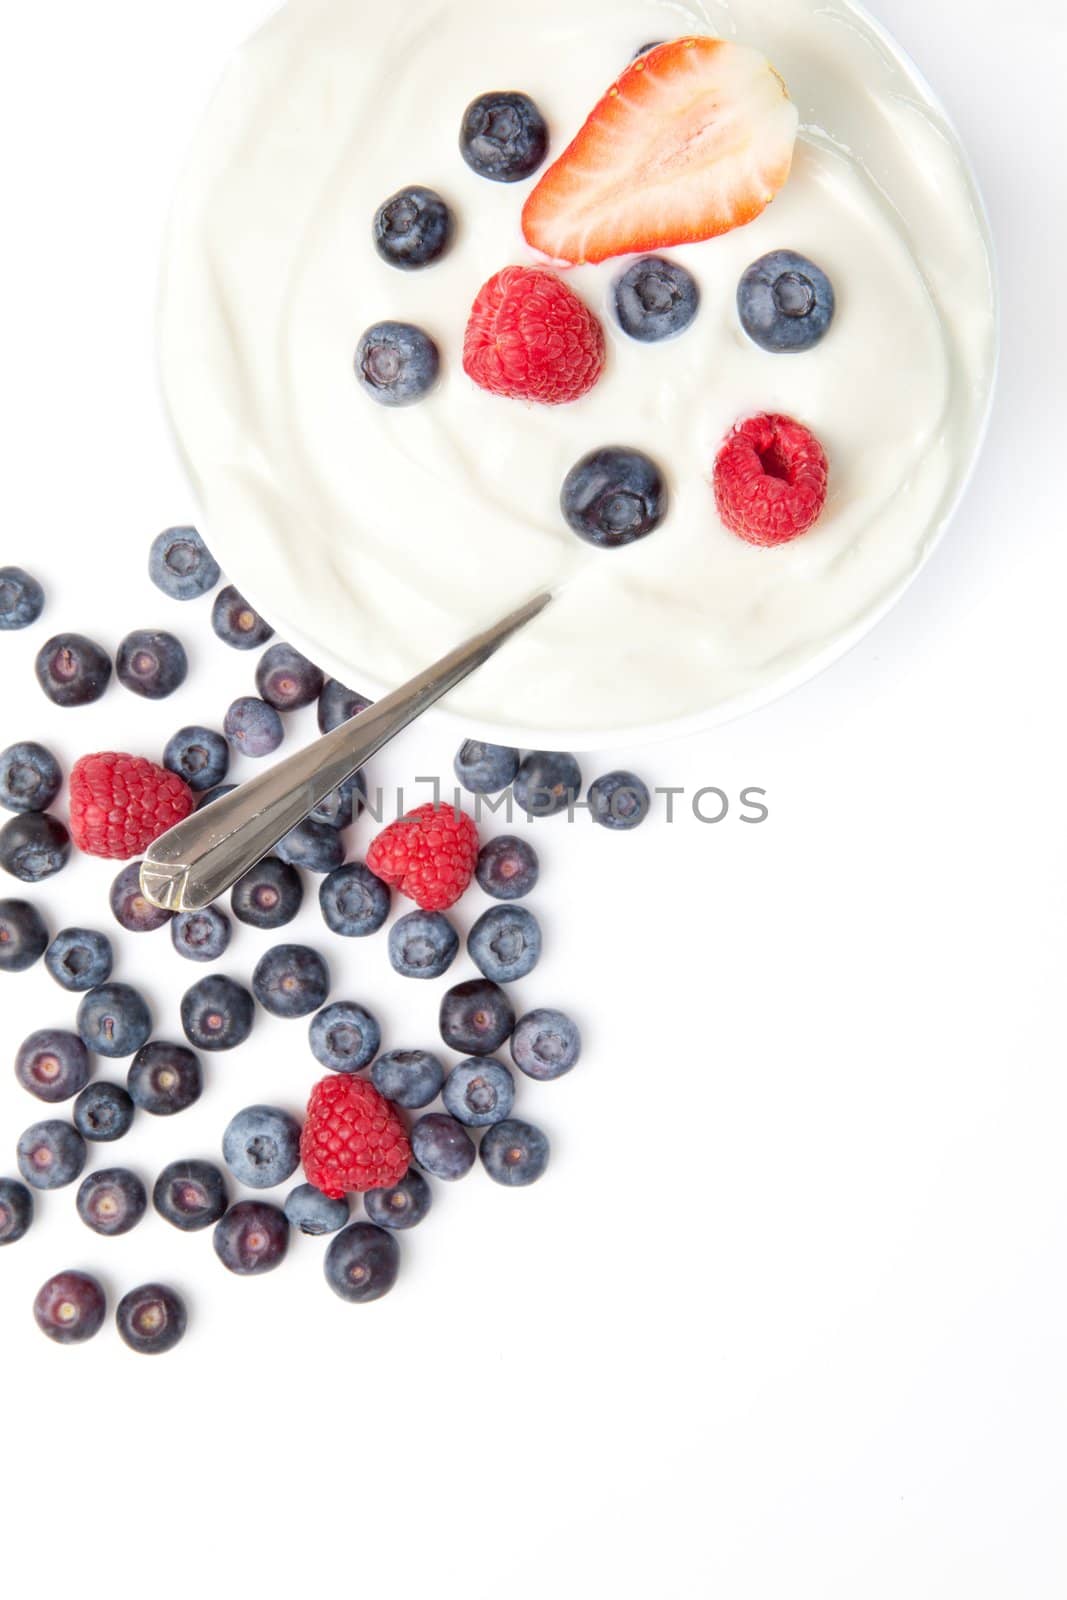 Bowl of cream with fruits by Wavebreakmedia